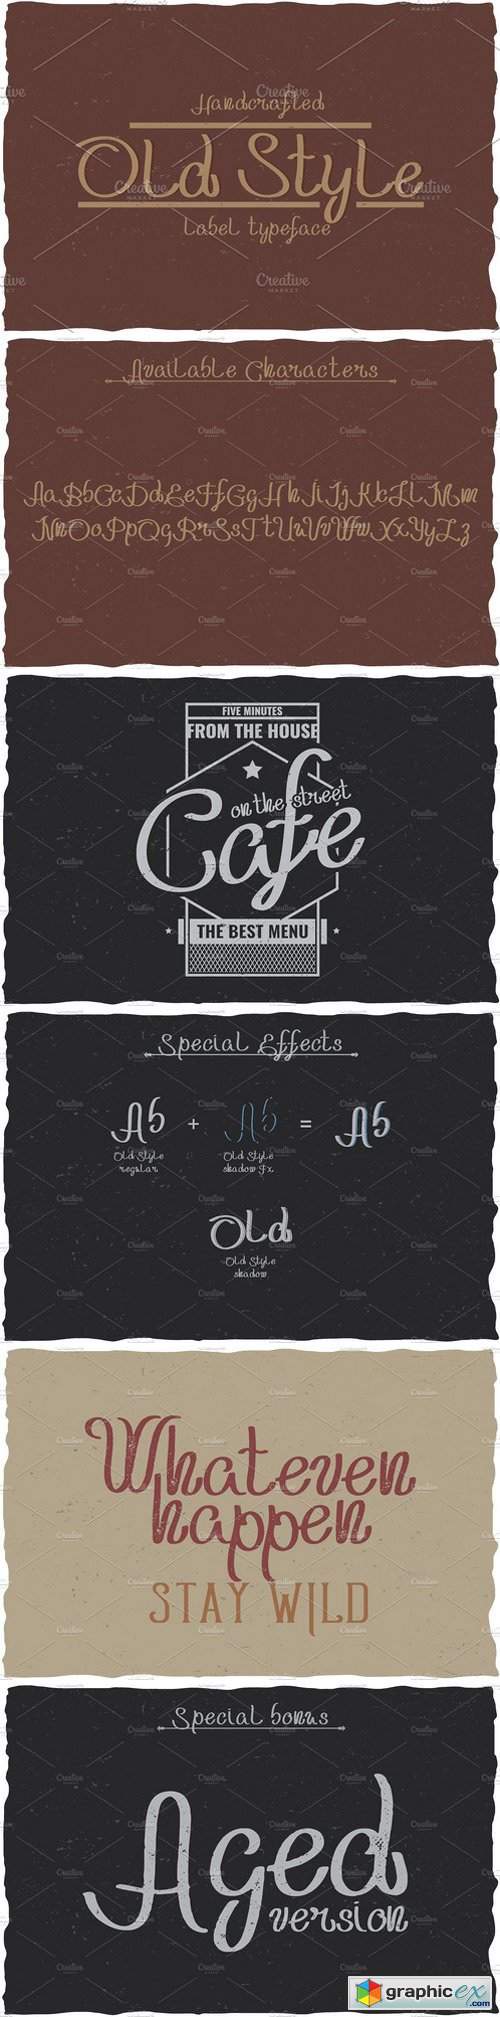 Handcrafted Old Style Label Typeface